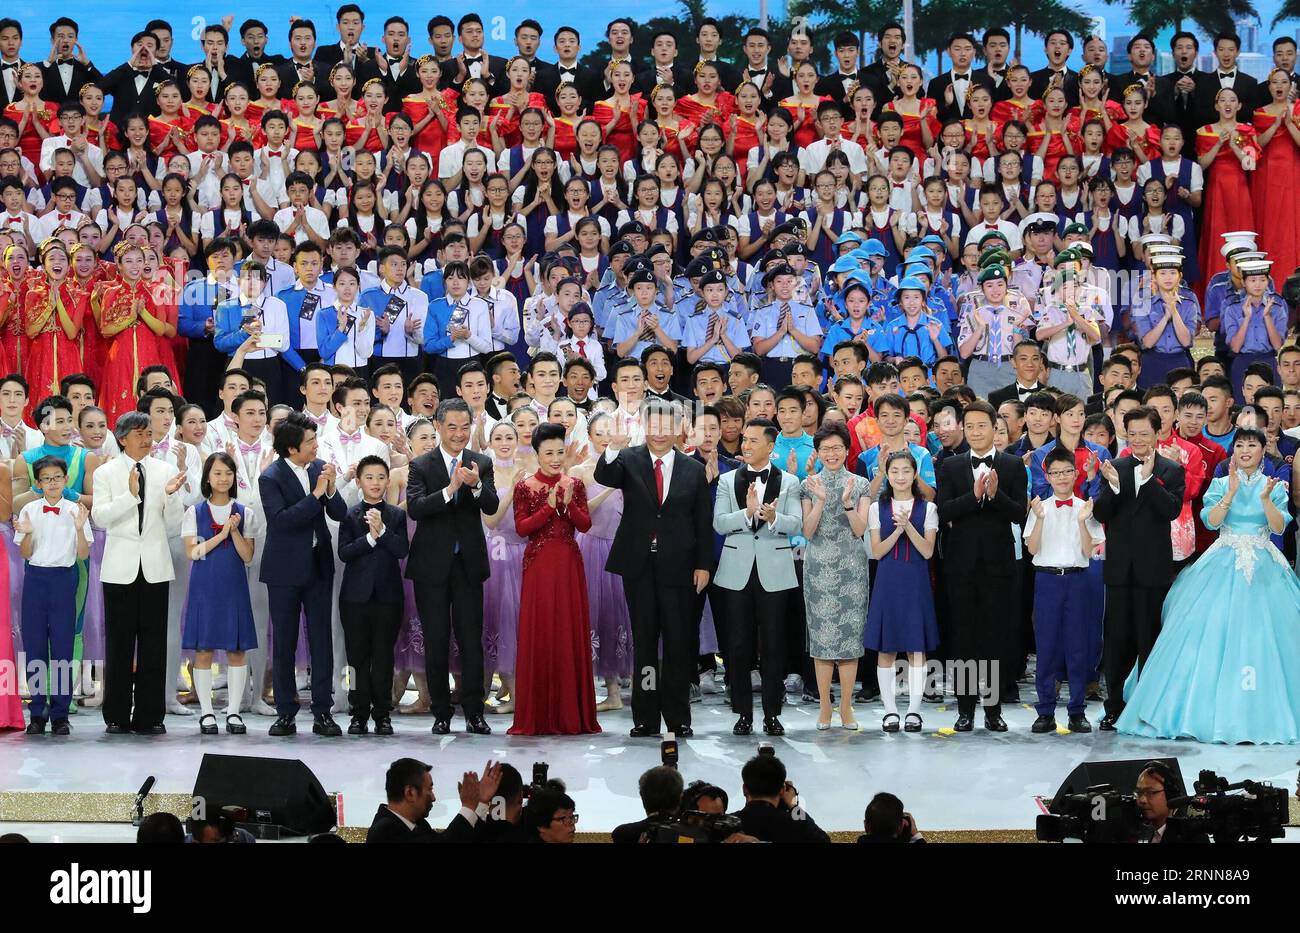 (170630) -- HONG KONG, June 30, 2017 -- Chinese President Xi Jinping (C, front), also general secretary of the Central Committee of the Communist Party of China and chairman of the Central Military Commission, steps onto the stage and sings in chorus the song Ode to the Motherland with the performers and the audience during a grand gala marking the 20th anniversary of Hong Kong s return to China at Hong Kong Convention and Exhibition Center, in Hong Kong, south China, June 30, 2017. ) (ly) CHINA-HONG KONG-20TH ANNIVERSARY-XI JINPING-GRAND GALA (CN) MaxZhancheng PUBLICATIONxNOTxINxCHN   Hong Ko Stock Photo